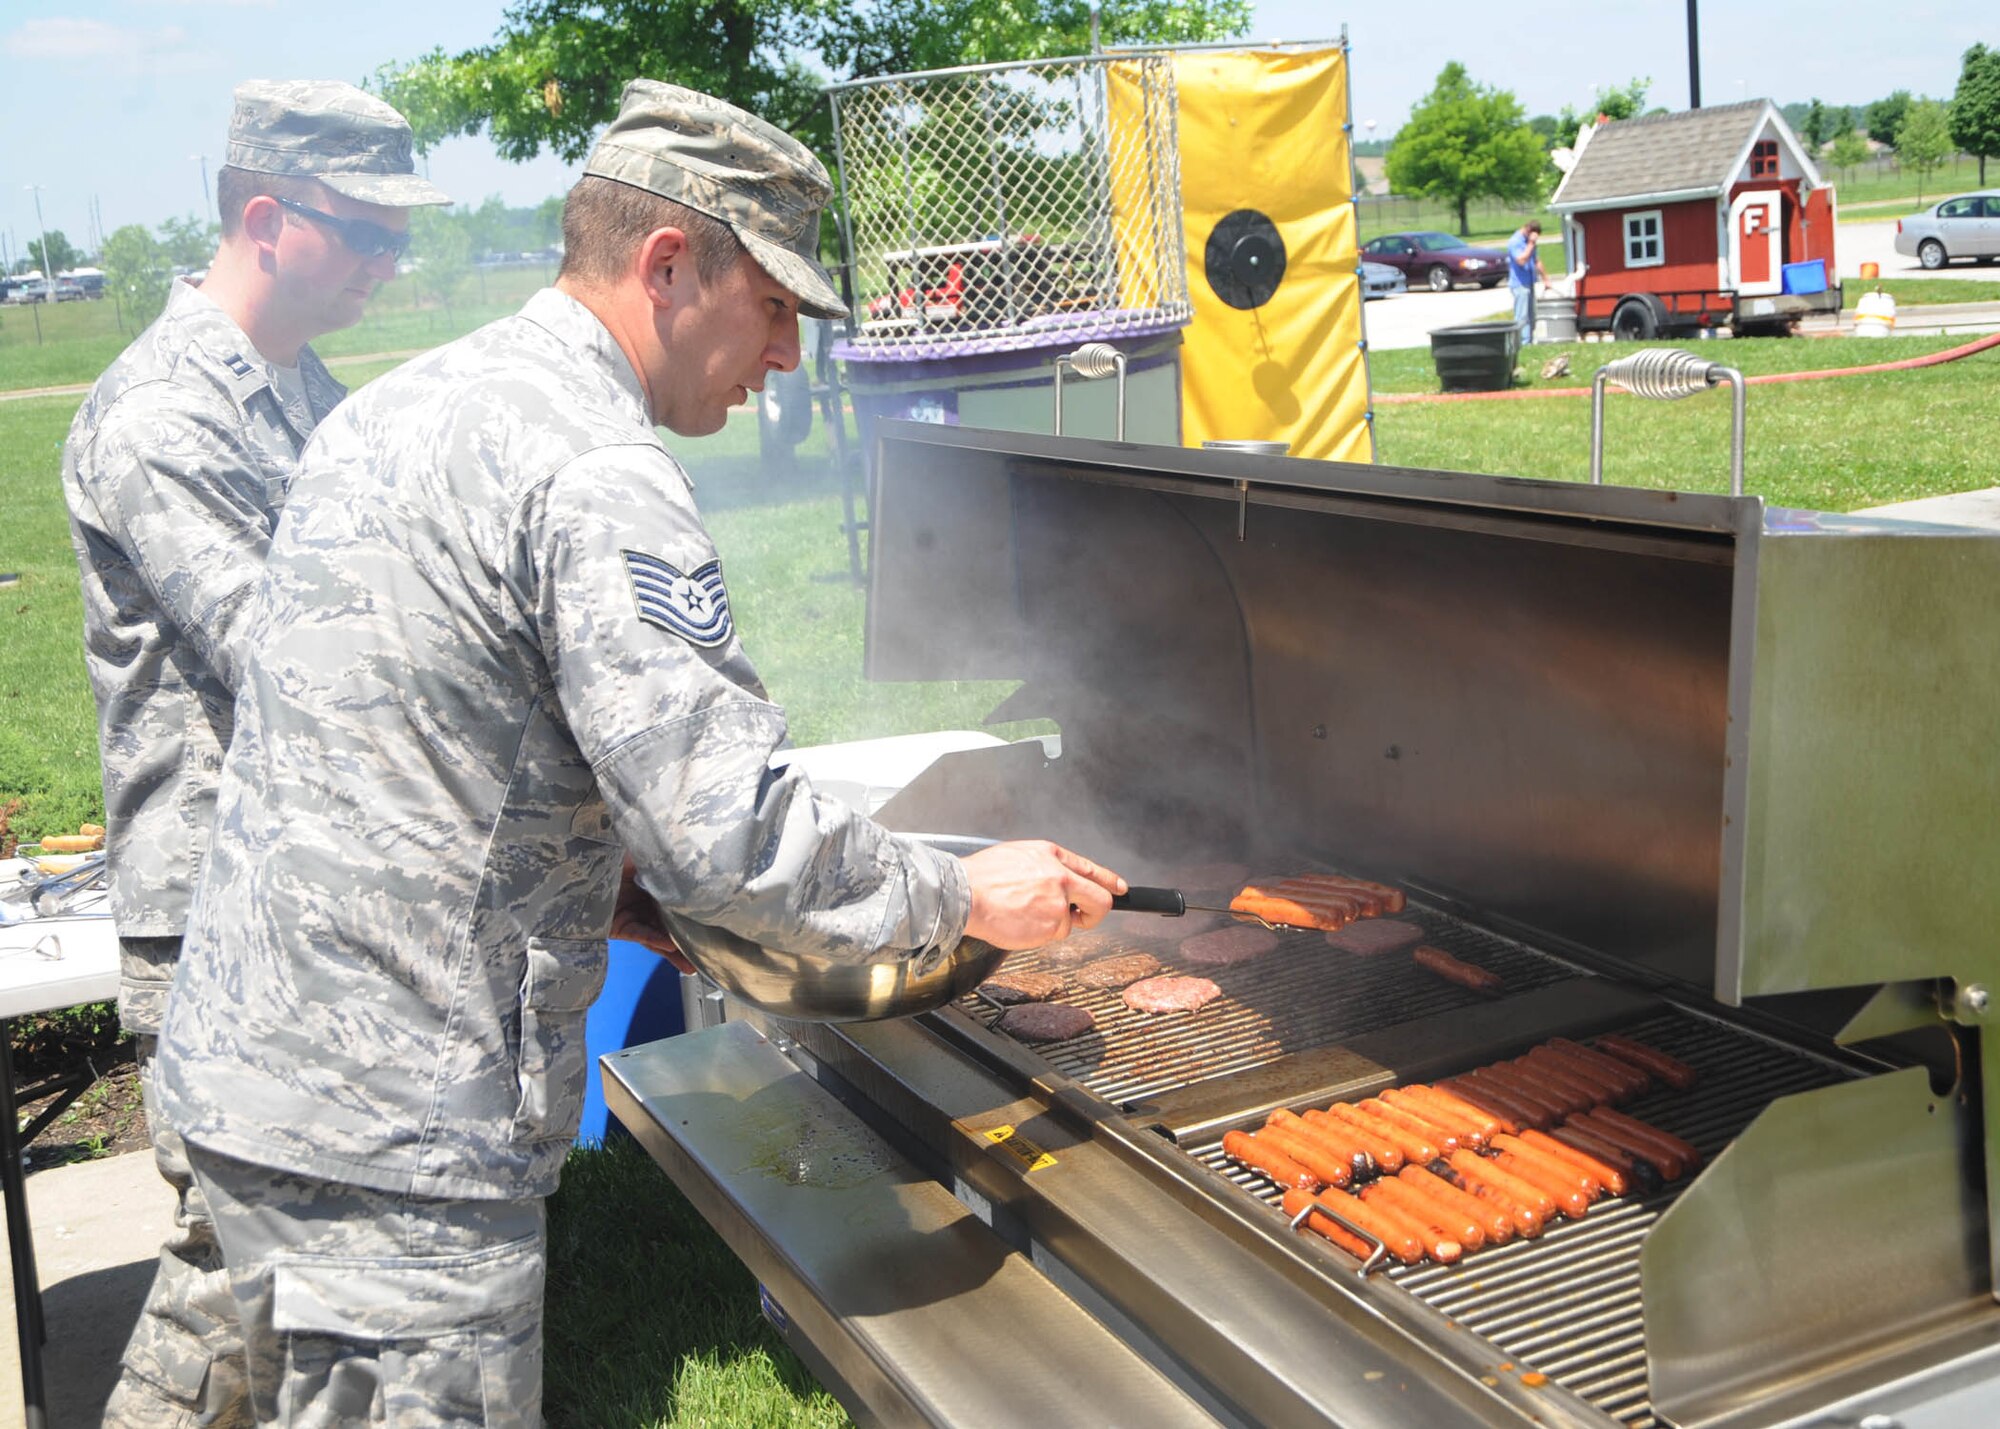 SCOTT AIR FORCE BASE, Ill. -- Capt. Tommy Fussell and Tech. Sgt. Mathew Alanza, 375th Airlift Wing Chapel, prepare hotdogs and hamburgers at the Dorm Olympics. (U.S. Air Force photo/Airman 1st Class Wesley Farnsworth)